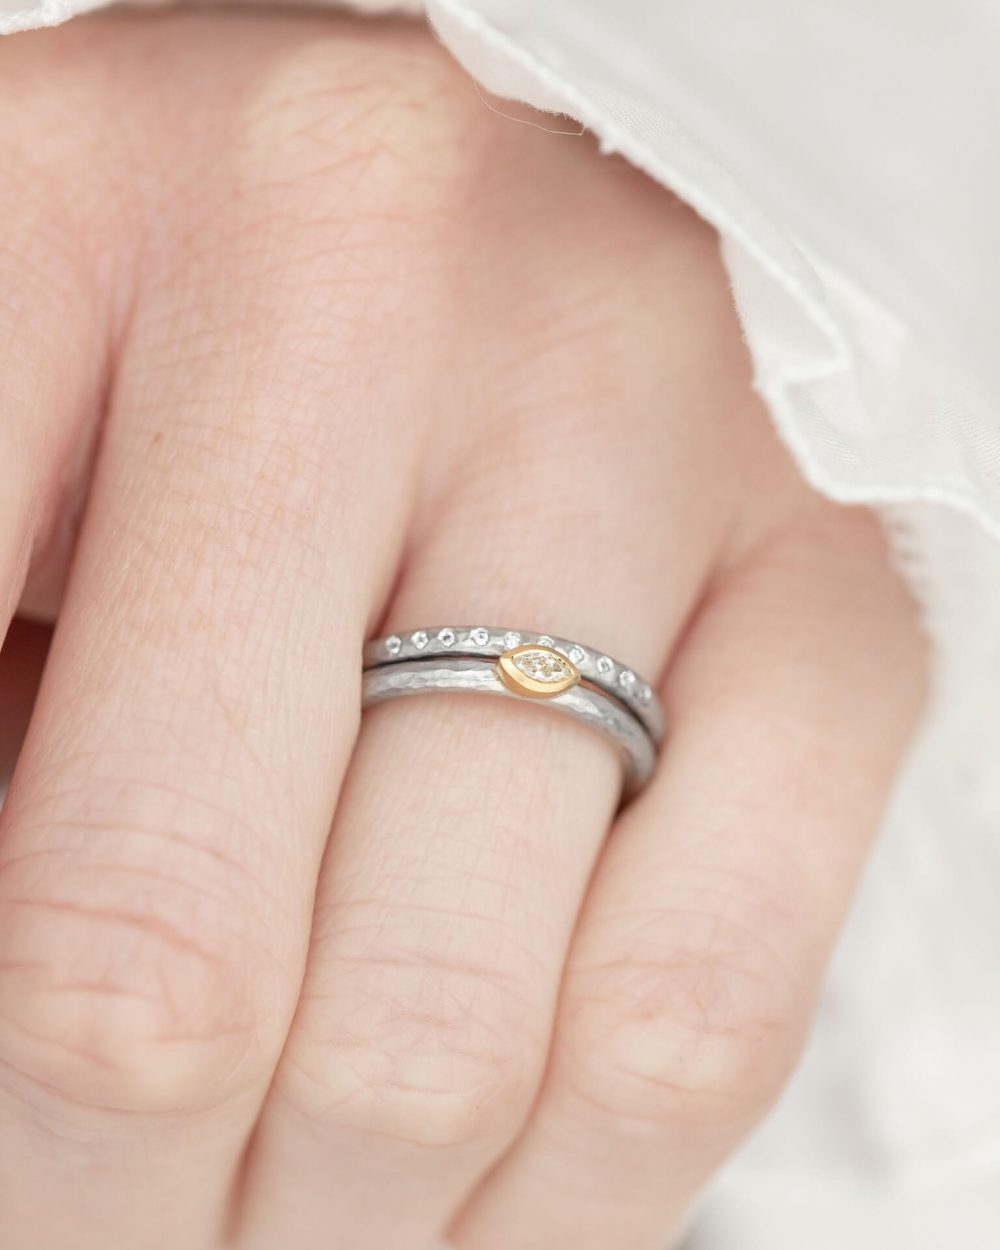 Marquise Diamond Ring Handmade In Hammered Textured Platinum, With A Yellow Gold Setting. Pictured On Model With A Matching Platinum Diamond Wedding Ring. Engagement Ring Designed By Jacks Turner Bristol Jeweller.